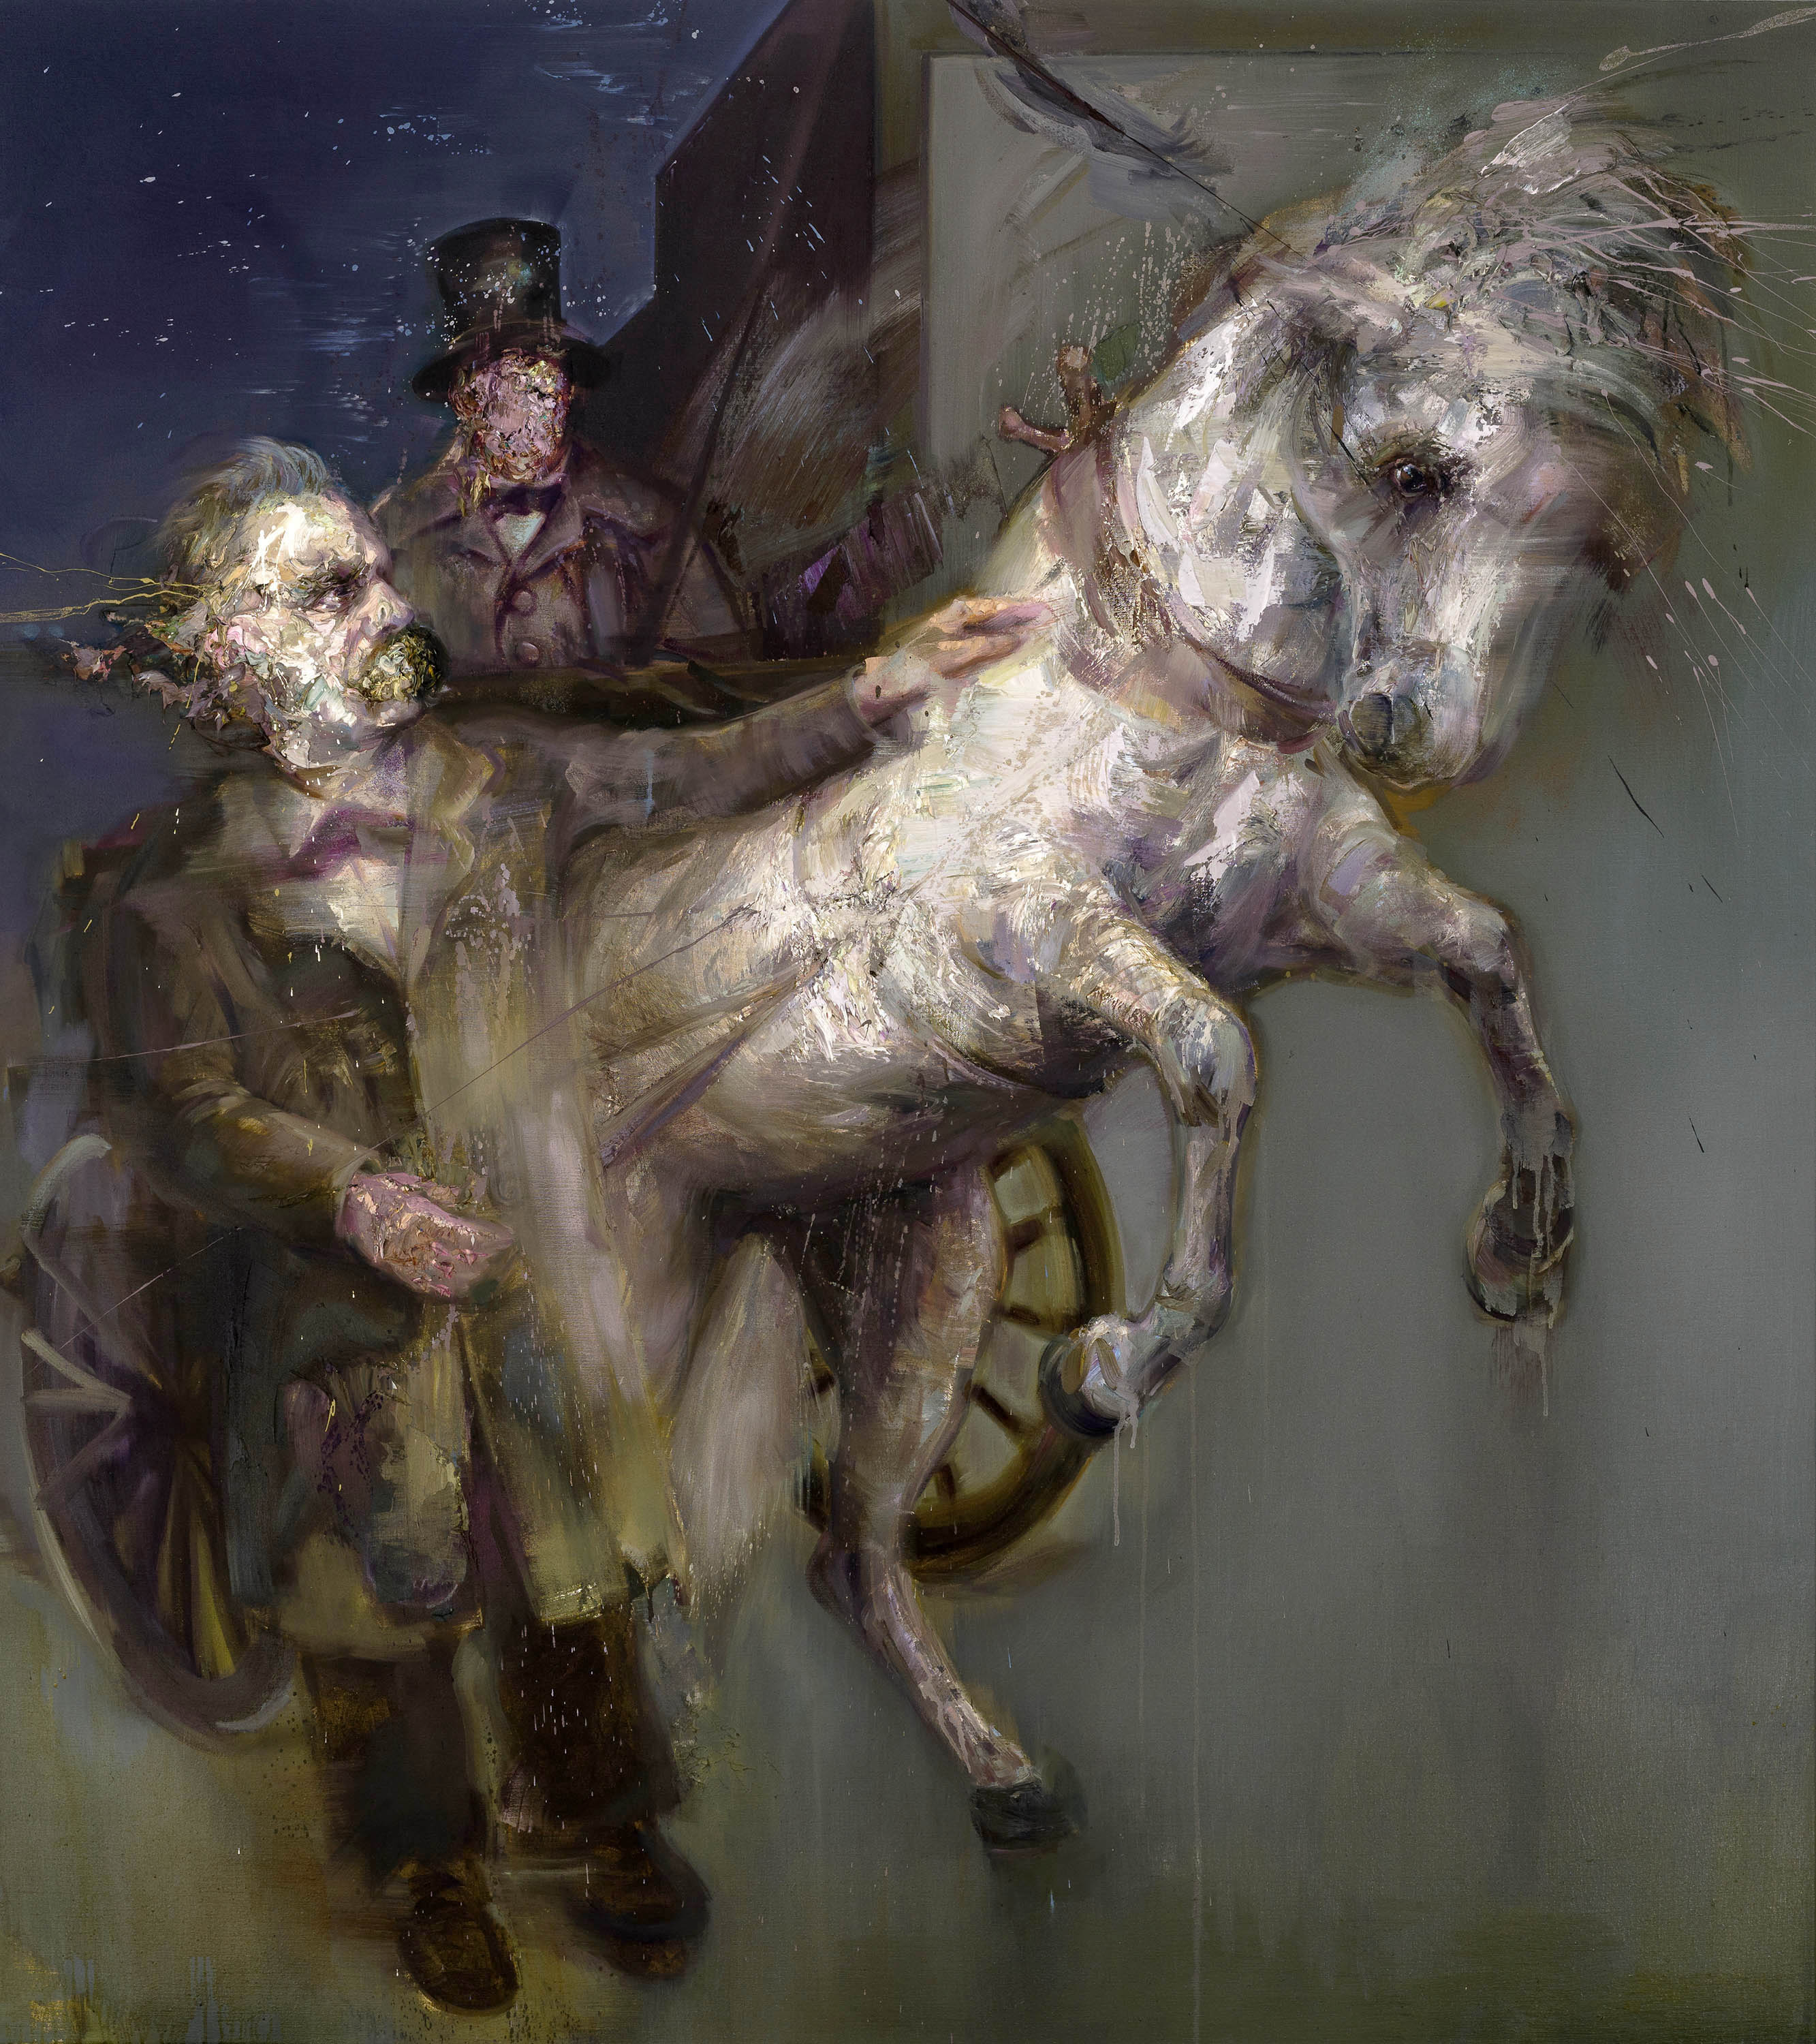 Nietzsche's madness crisis when meeting a horse depicted in painting.